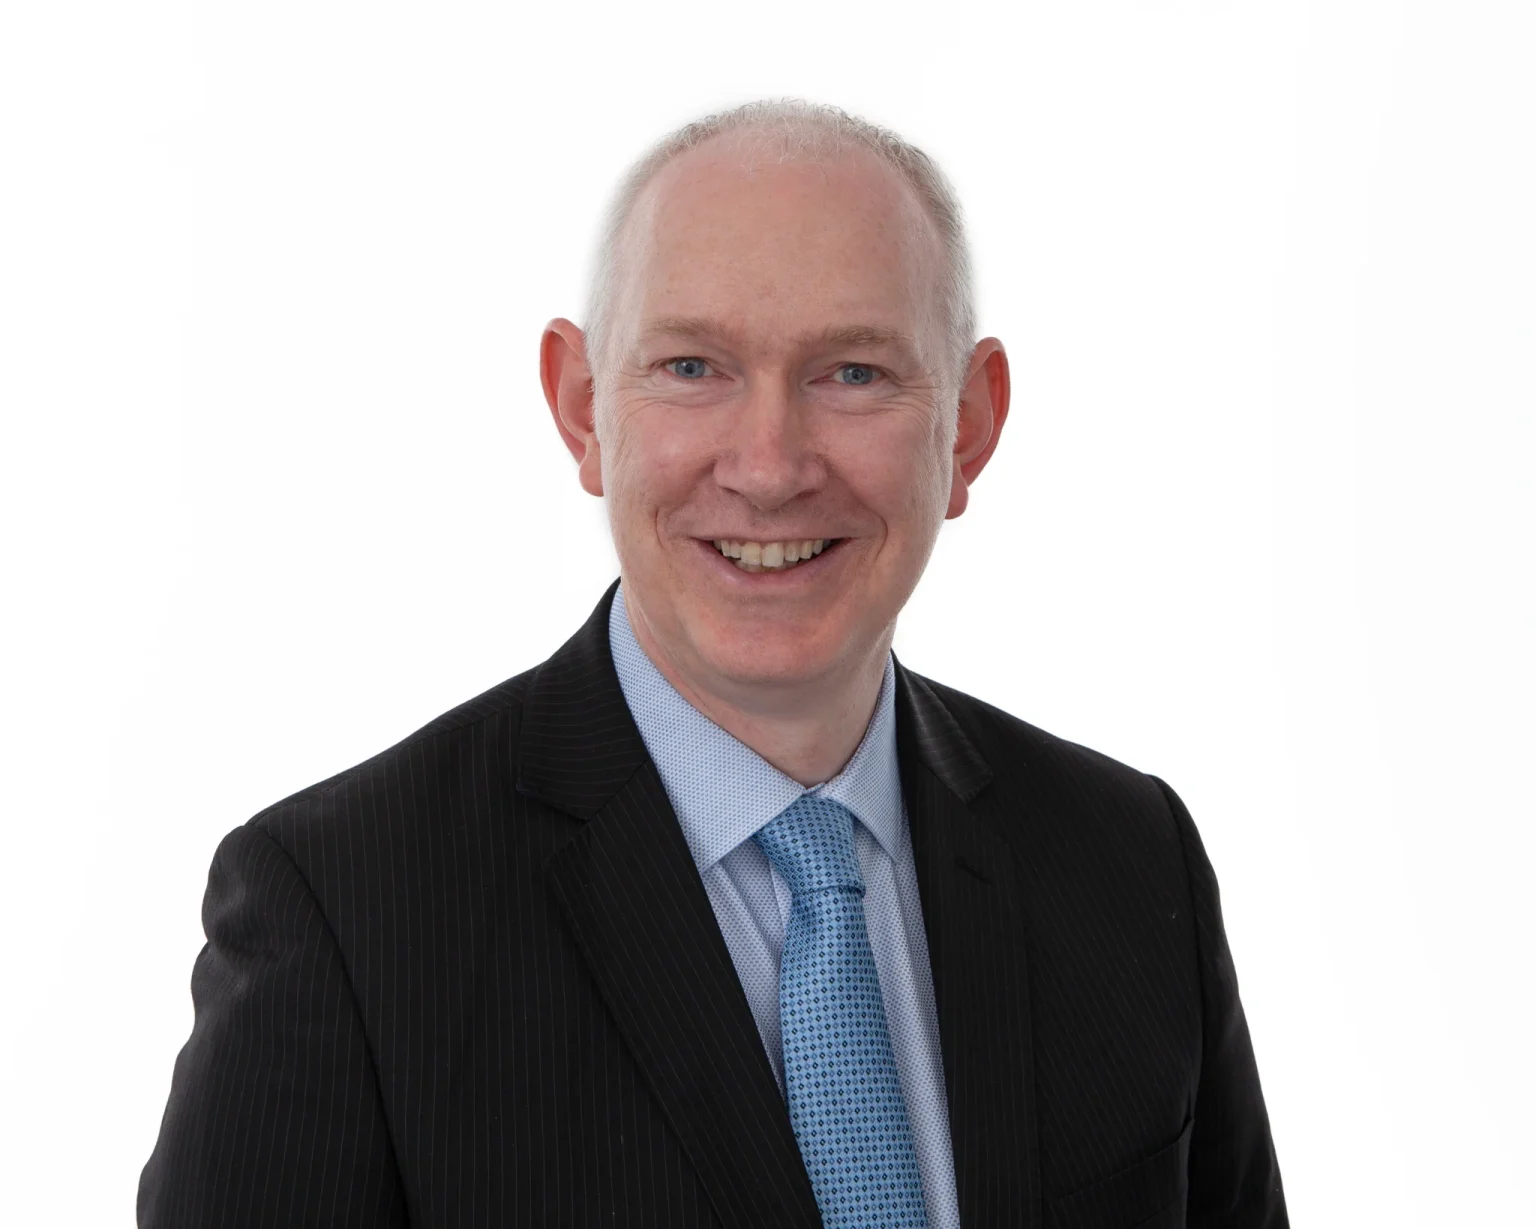 Jim-Downing-Commercial-Property-Sales-Solicitor-Dublin